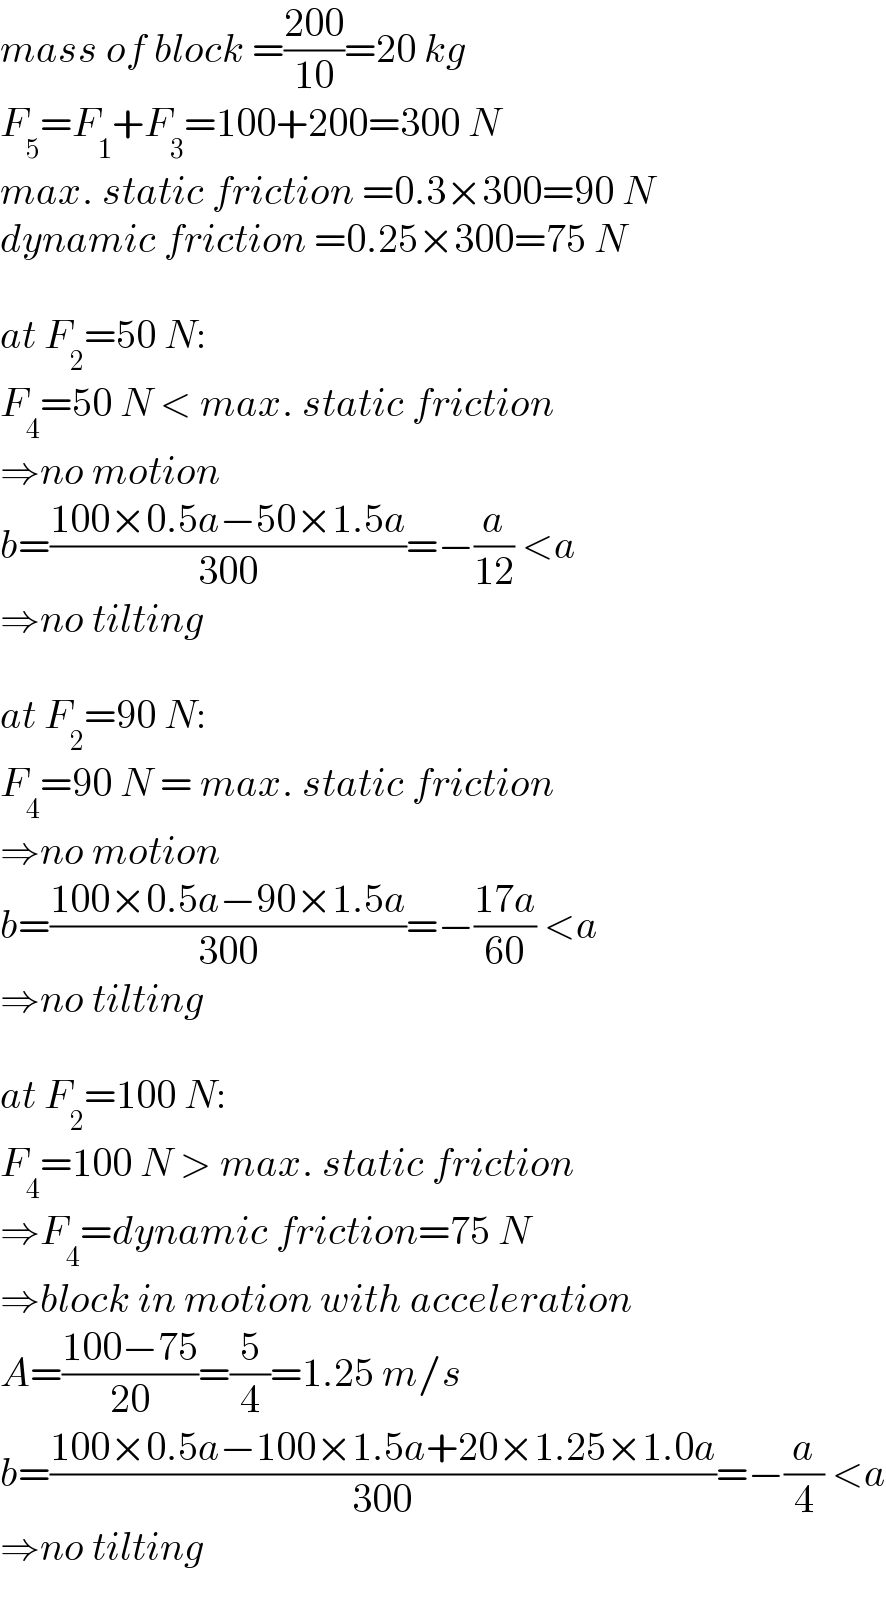 mass of block =((200)/(10))=20 kg  F_5 =F_1 +F_3 =100+200=300 N  max. static friction =0.3×300=90 N  dynamic friction =0.25×300=75 N    at F_2 =50 N:  F_4 =50 N < max. static friction  ⇒no motion  b=((100×0.5a−50×1.5a)/(300))=−(a/(12)) <a  ⇒no tilting    at F_2 =90 N:  F_4 =90 N = max. static friction  ⇒no motion  b=((100×0.5a−90×1.5a)/(300))=−((17a)/(60)) <a  ⇒no tilting    at F_2 =100 N:  F_4 =100 N > max. static friction  ⇒F_4 =dynamic friction=75 N  ⇒block in motion with acceleration  A=((100−75)/(20))=(5/4)=1.25 m/s  b=((100×0.5a−100×1.5a+20×1.25×1.0a)/(300))=−(a/4) <a  ⇒no tilting  